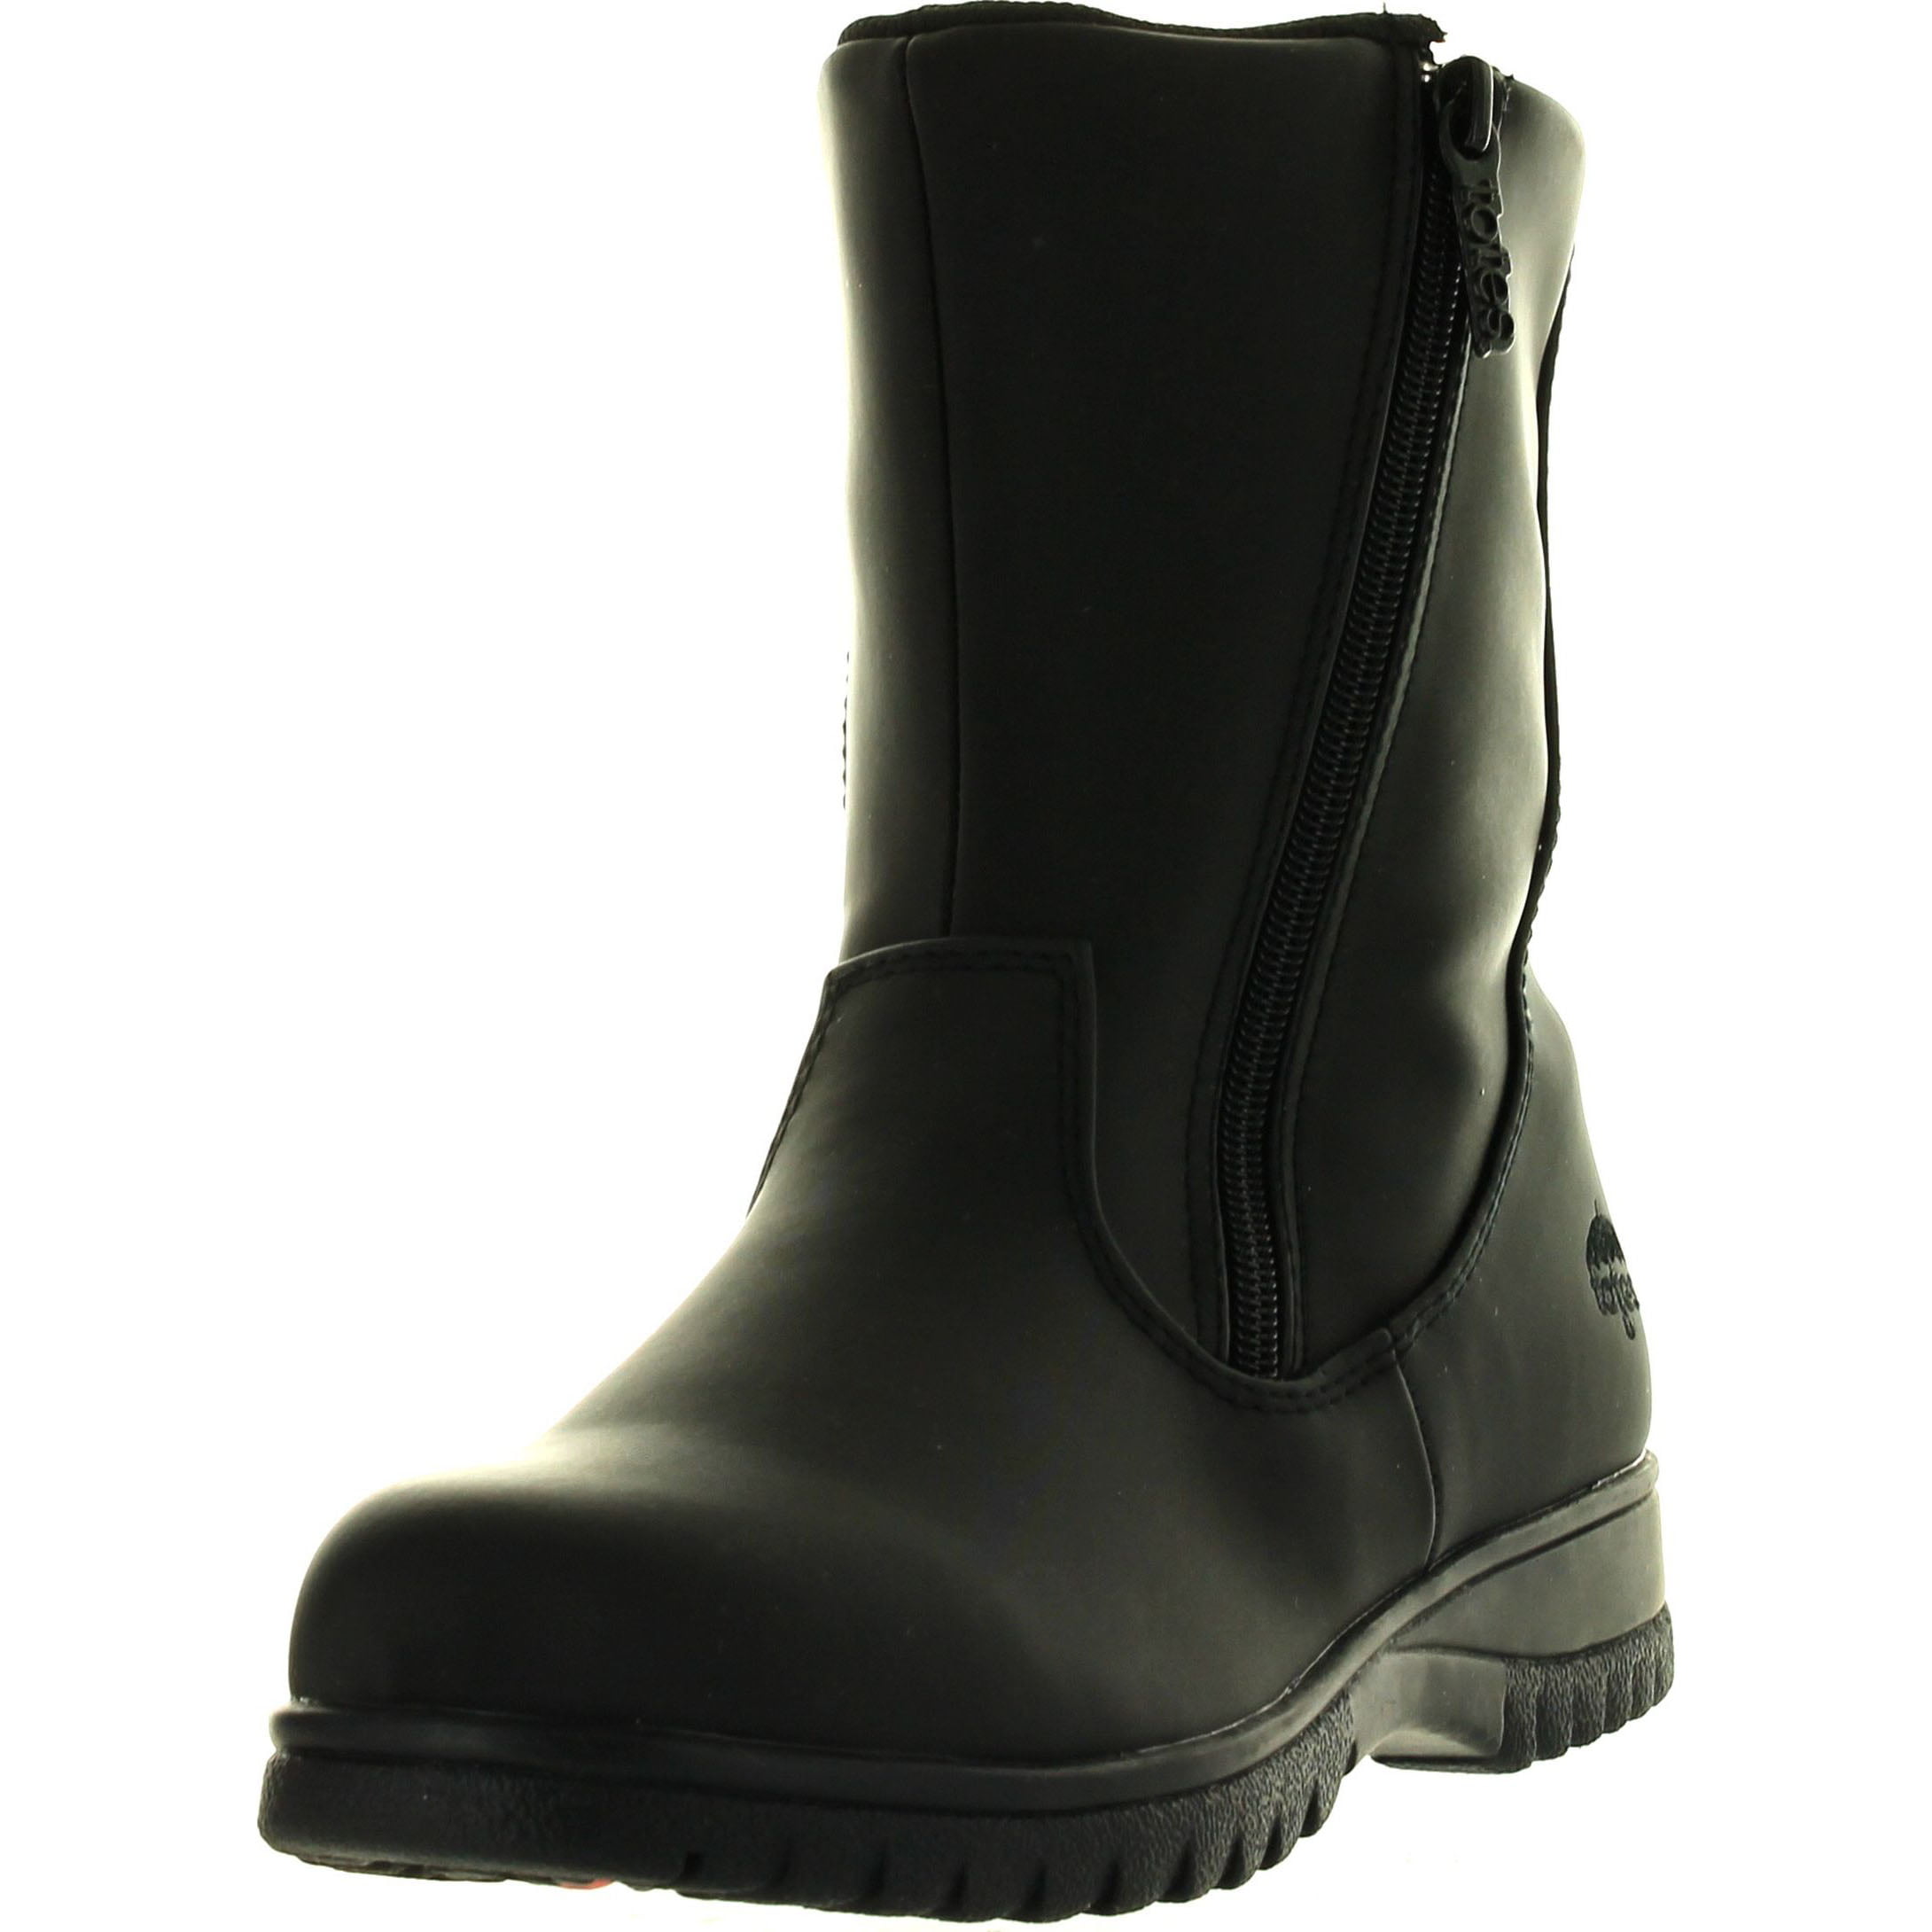 totes - Totes Womens Rosie 2 Winter Waterproof Snow Boots, Black, 7 ...